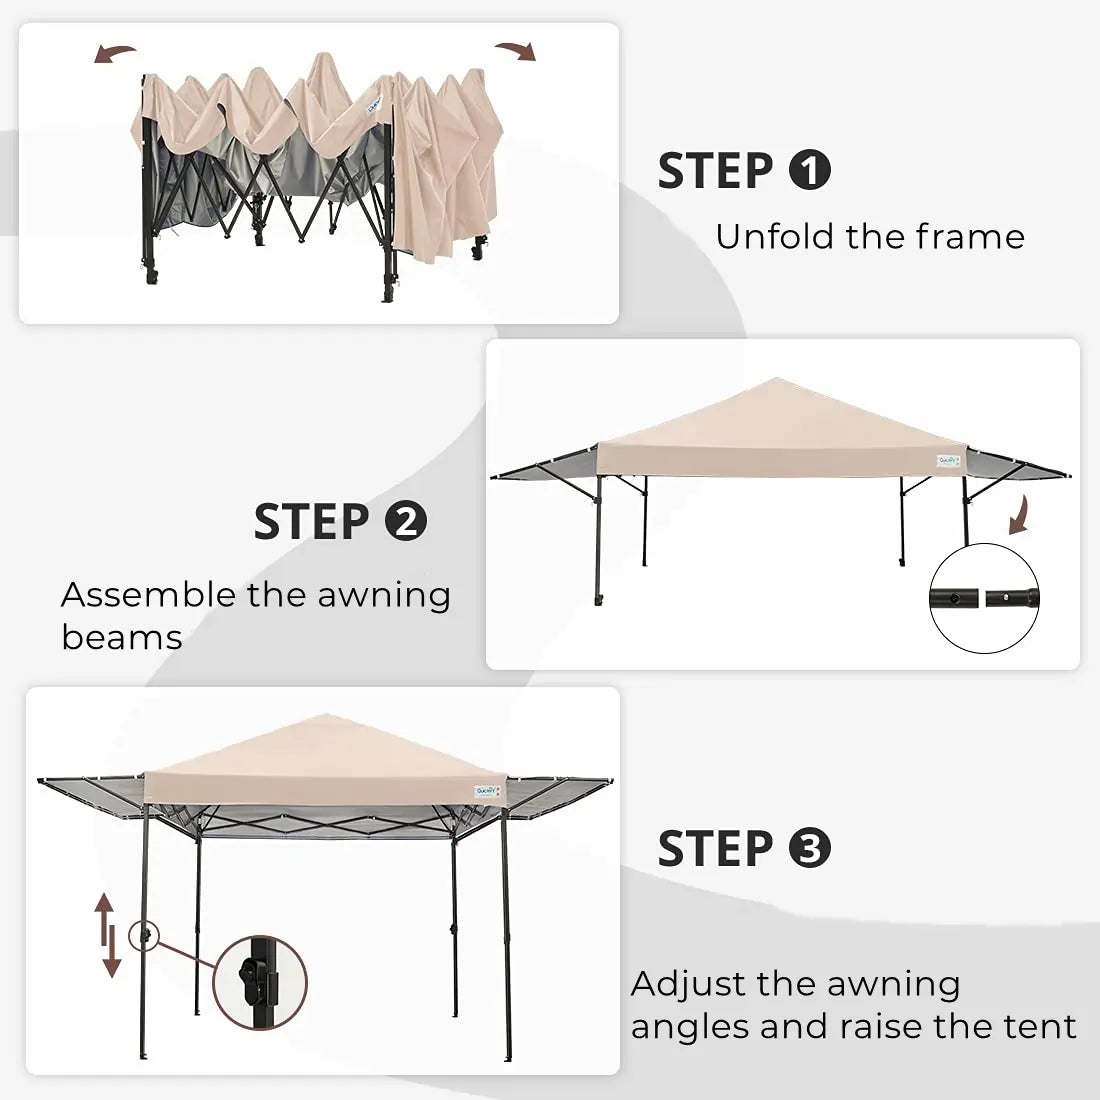 Tan 10x10 pop up shade tent installation guide#color_tan